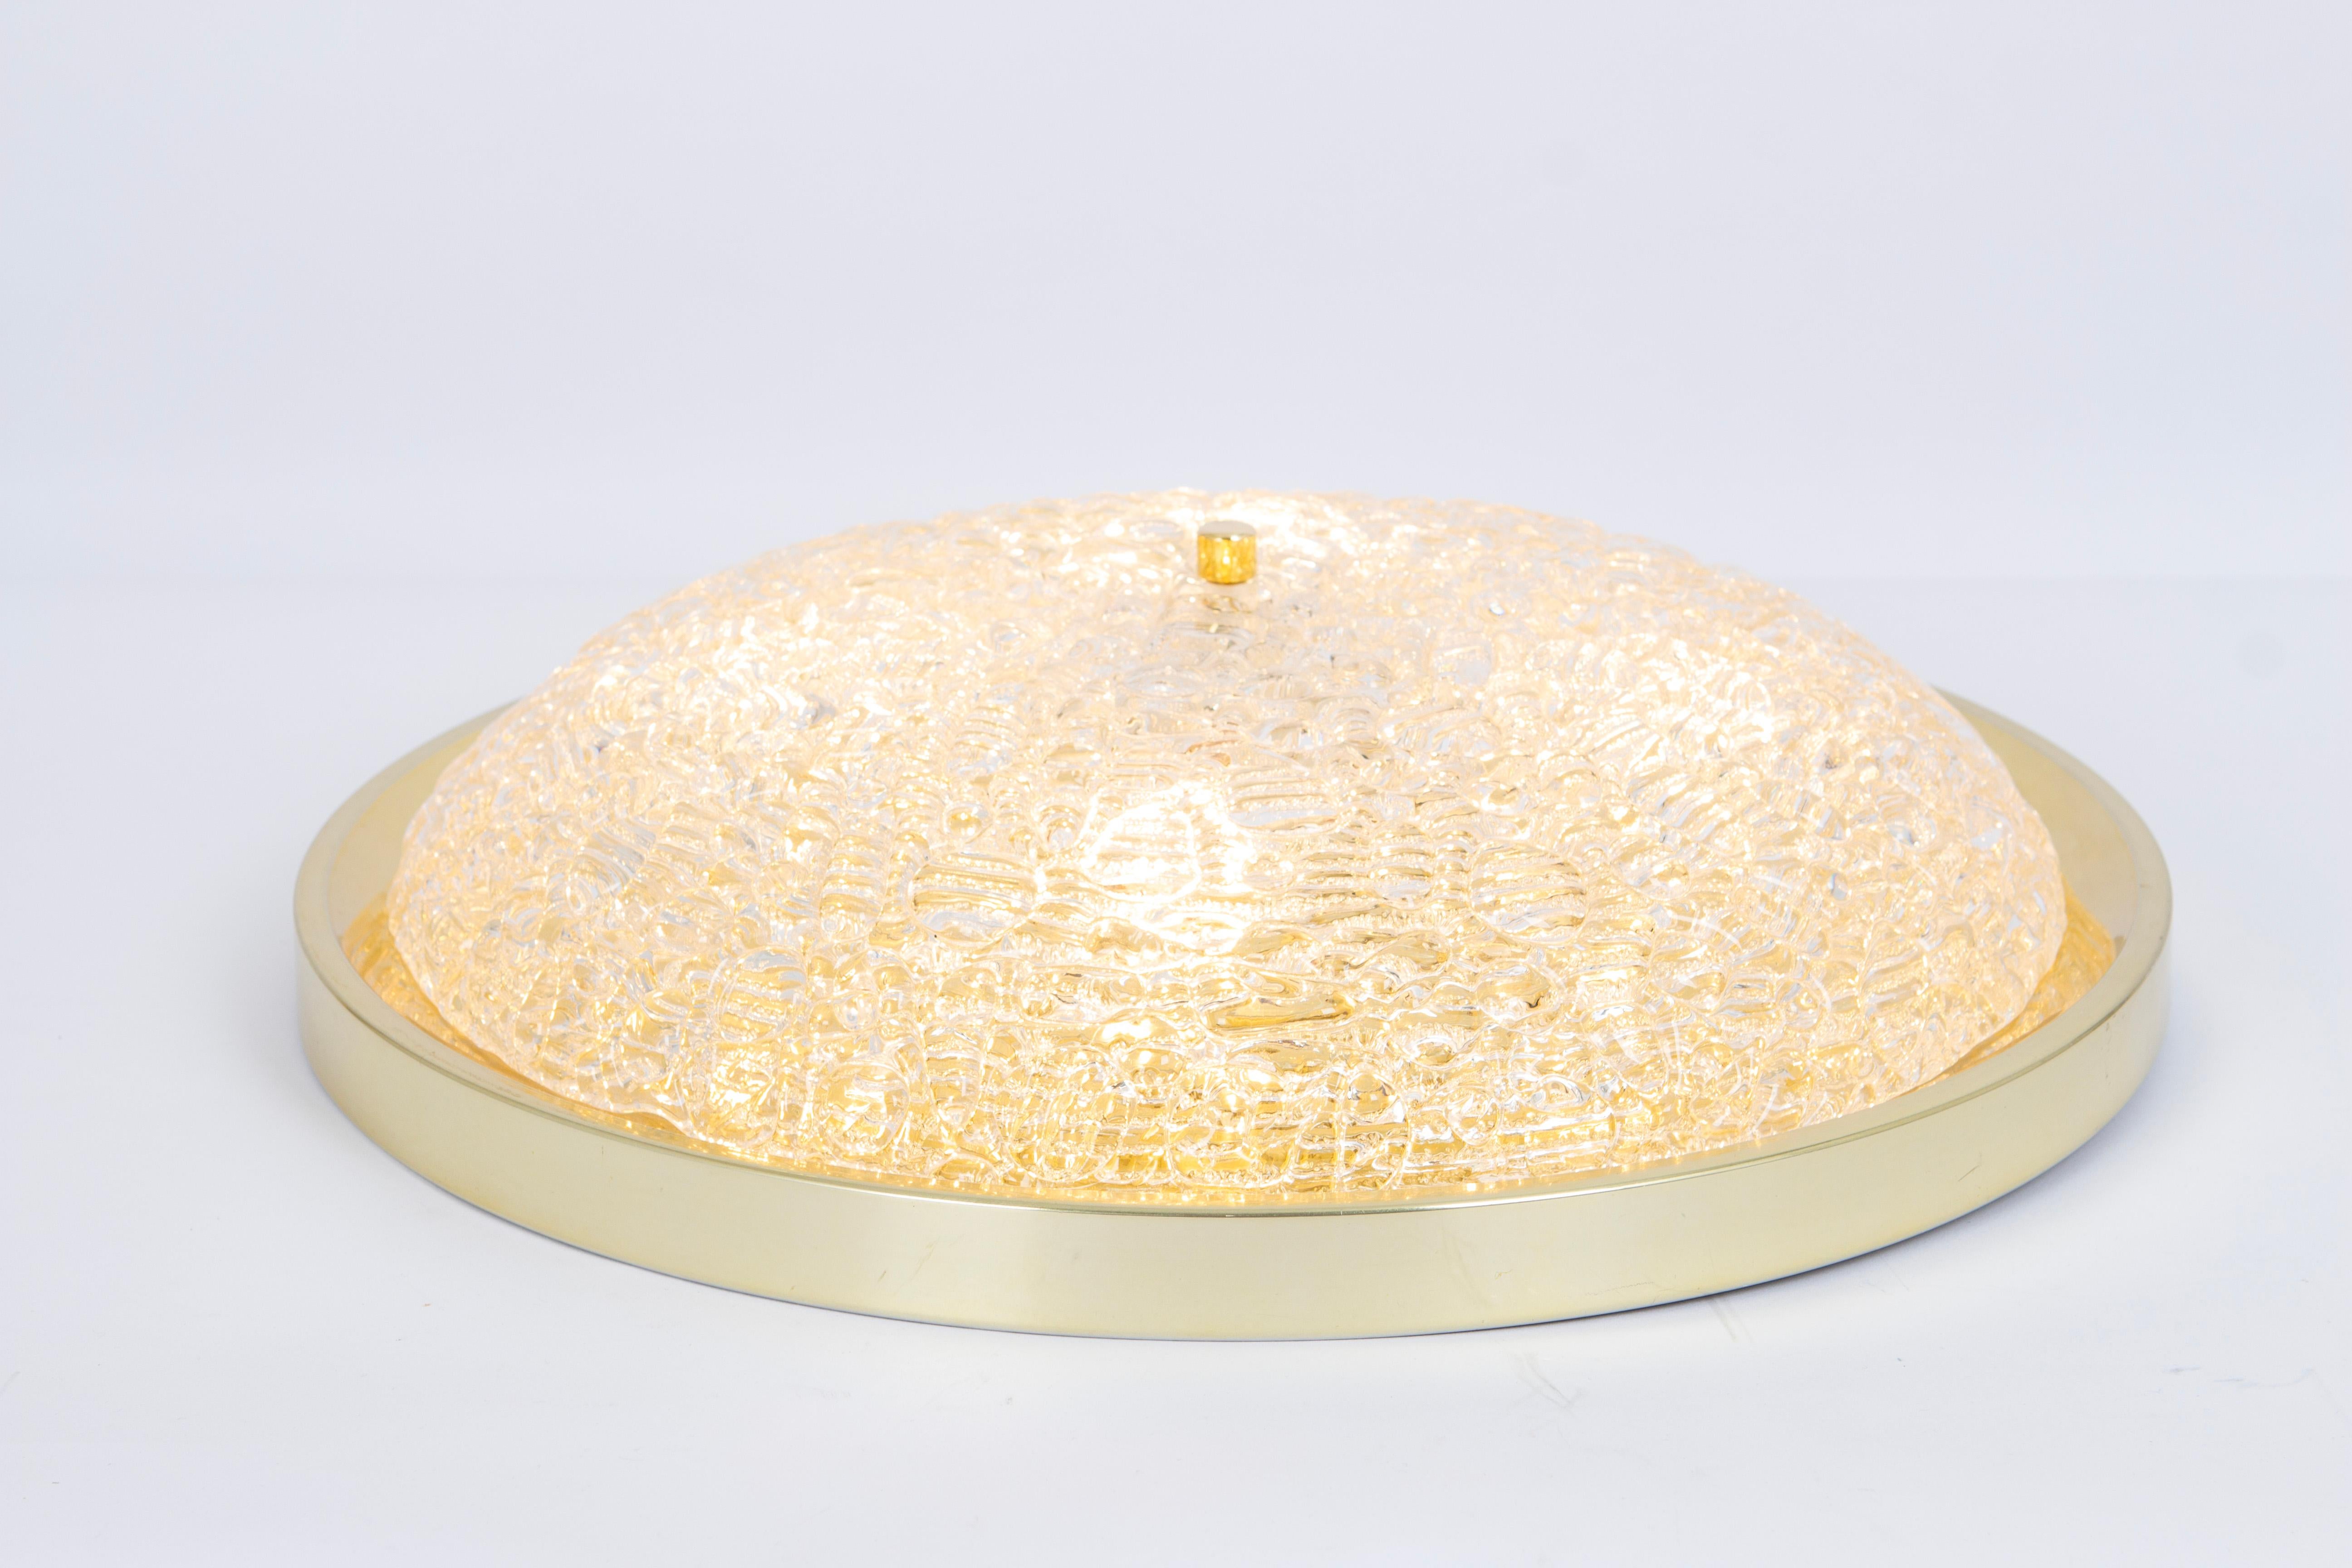 Large Murano Flush Mount, by Doria, Germany, 1970s For Sale 1